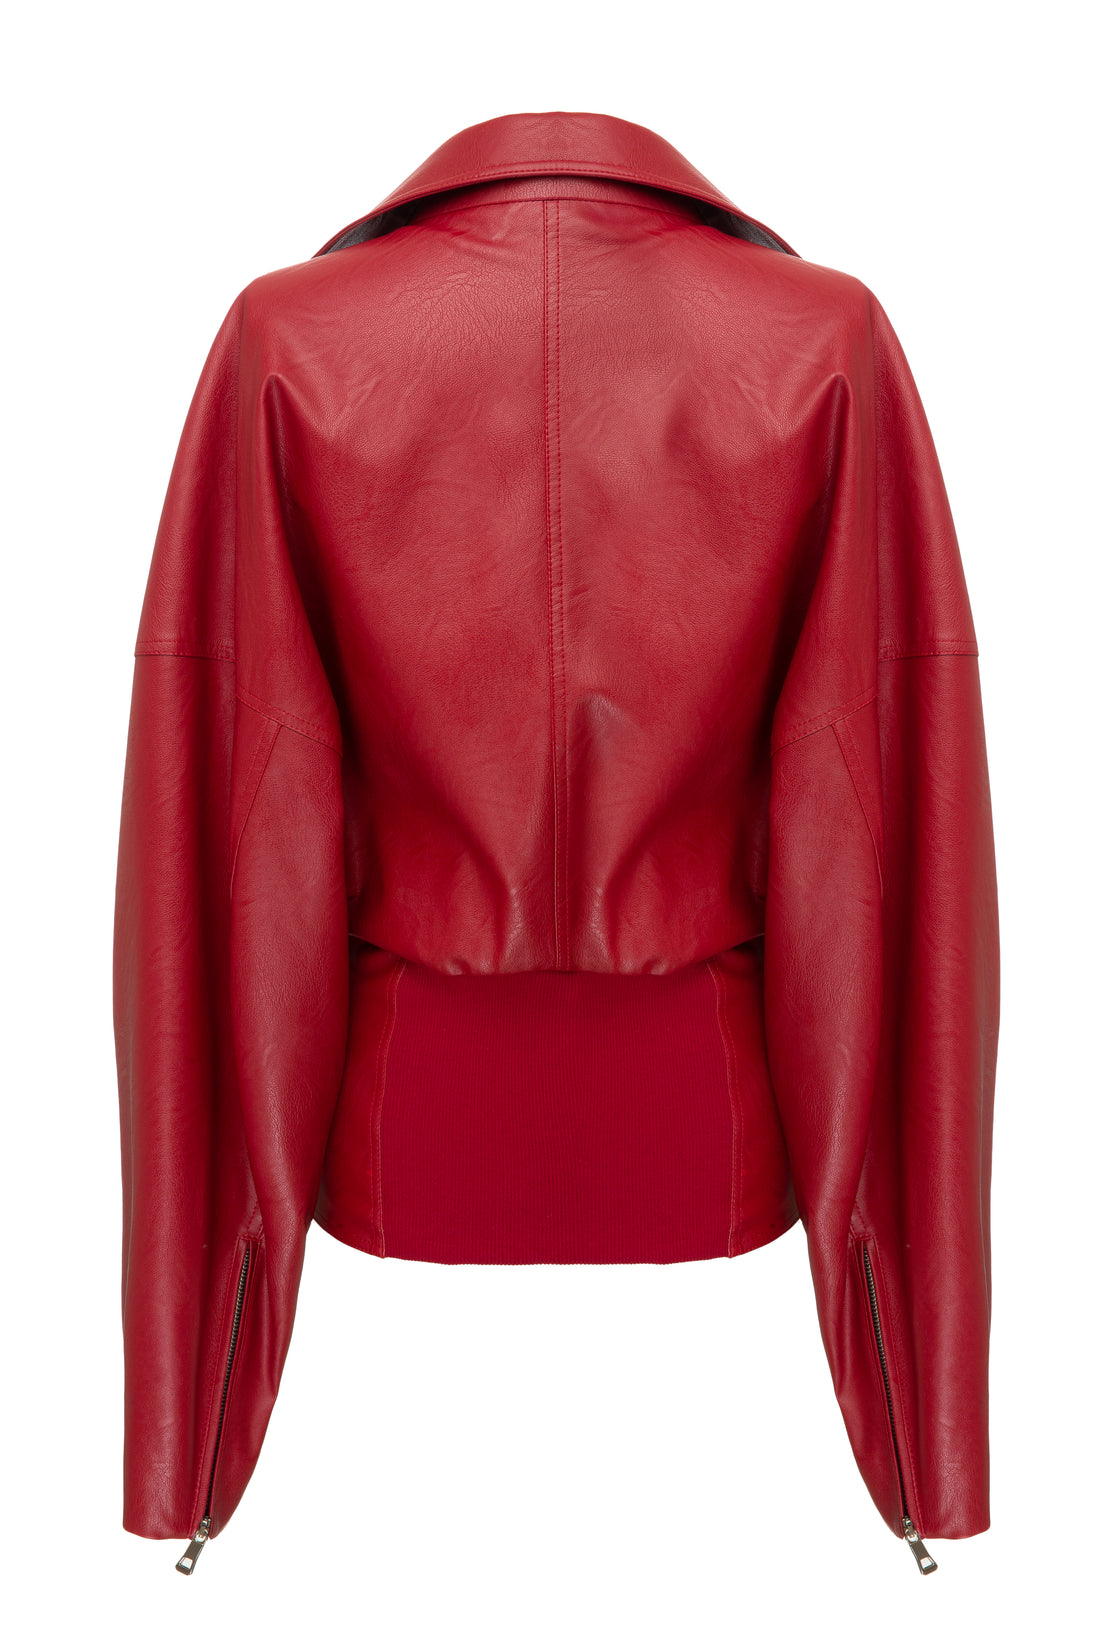 SITUATIONIST Red Jacket in Vegan Leather